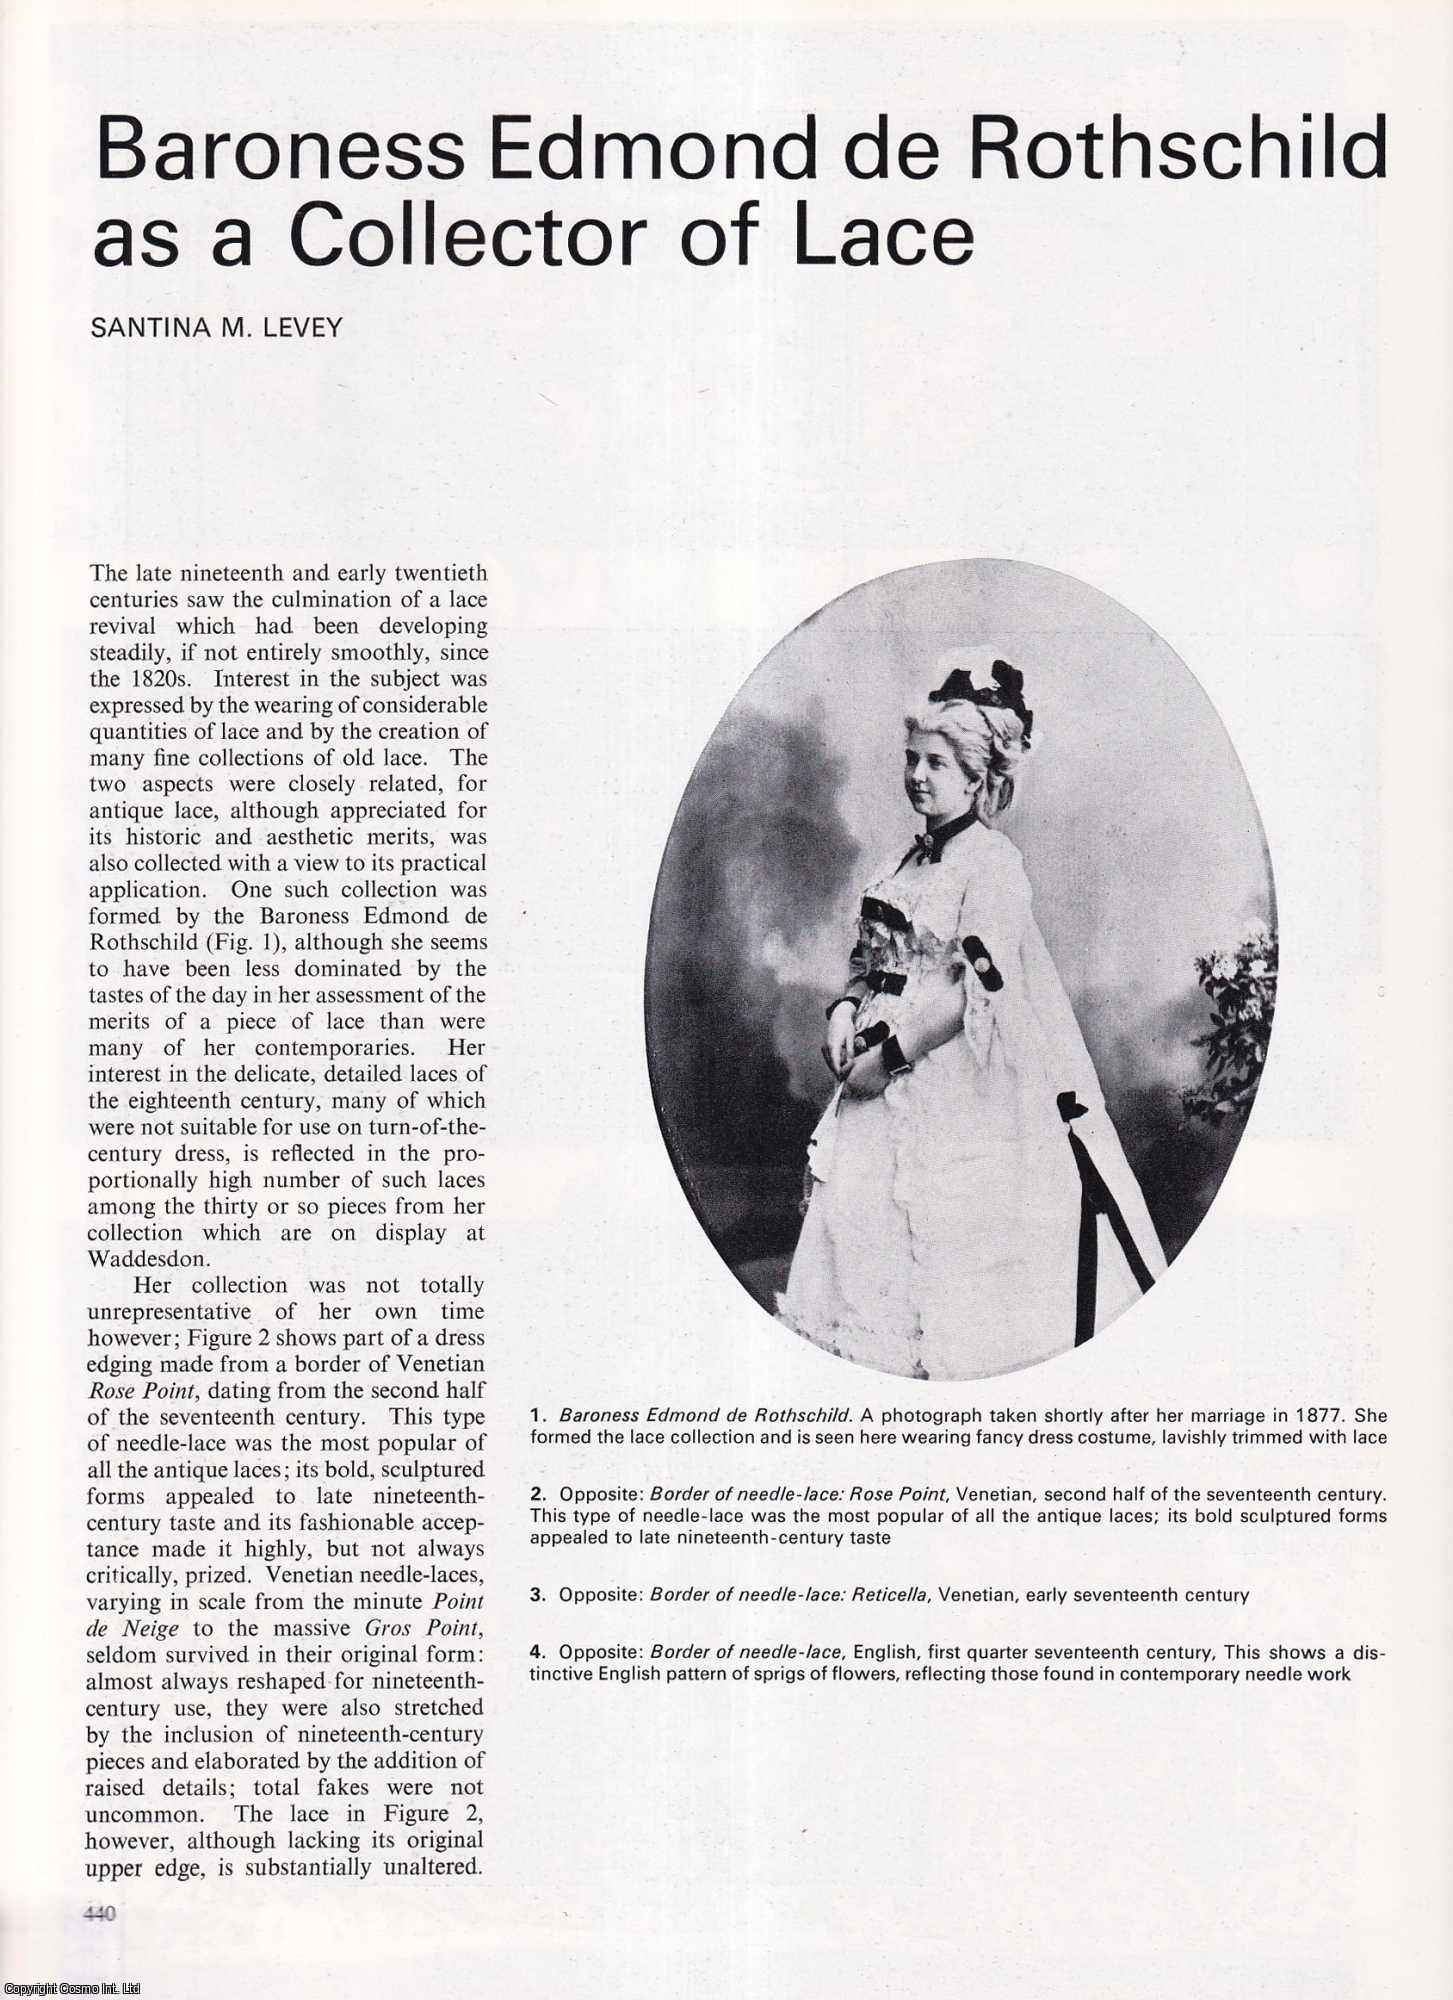 Santina M. Levey - Baroness Edmond de Rothschild as a Collector of Lace. An original article from Apollo, International Magazine of the Arts, 1977.